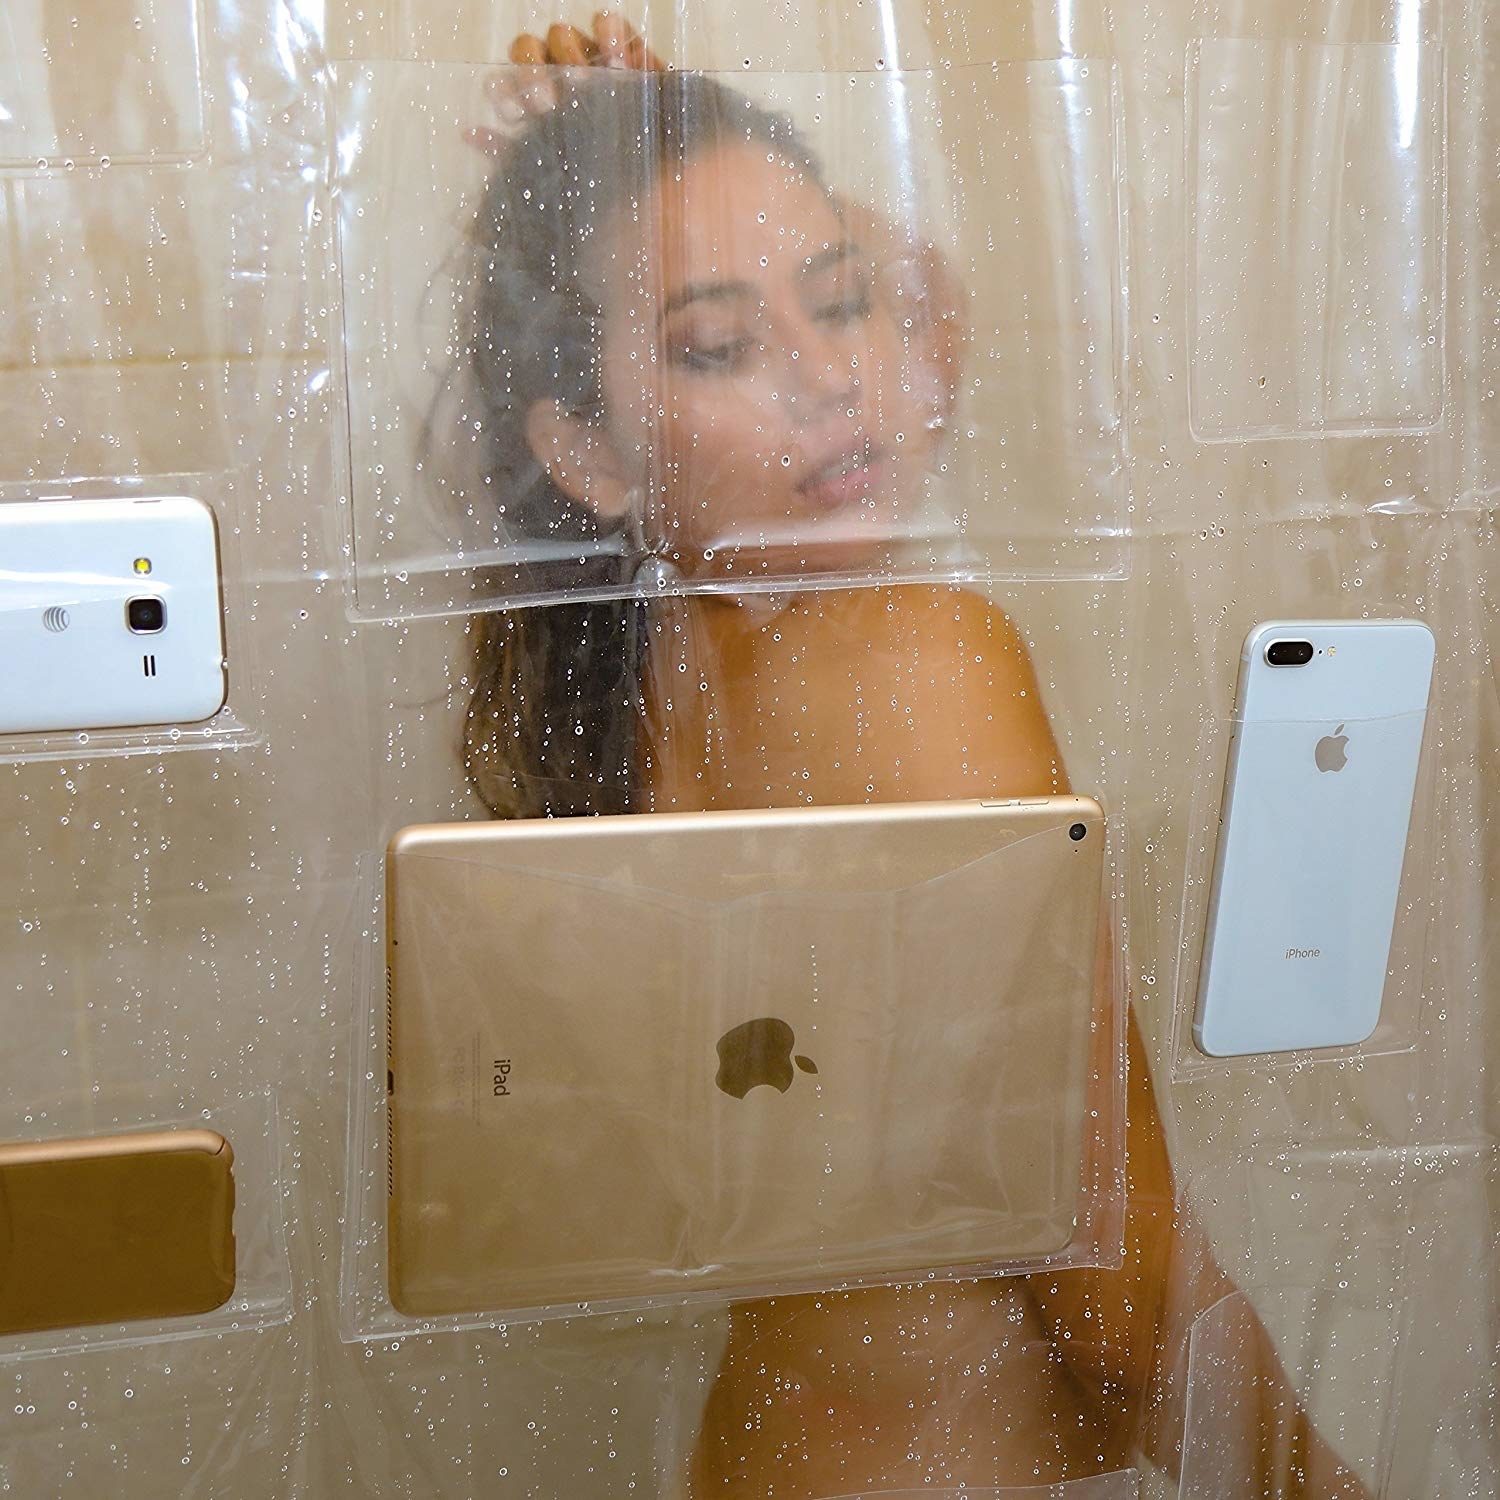 devices in pockets of clear shower curtain